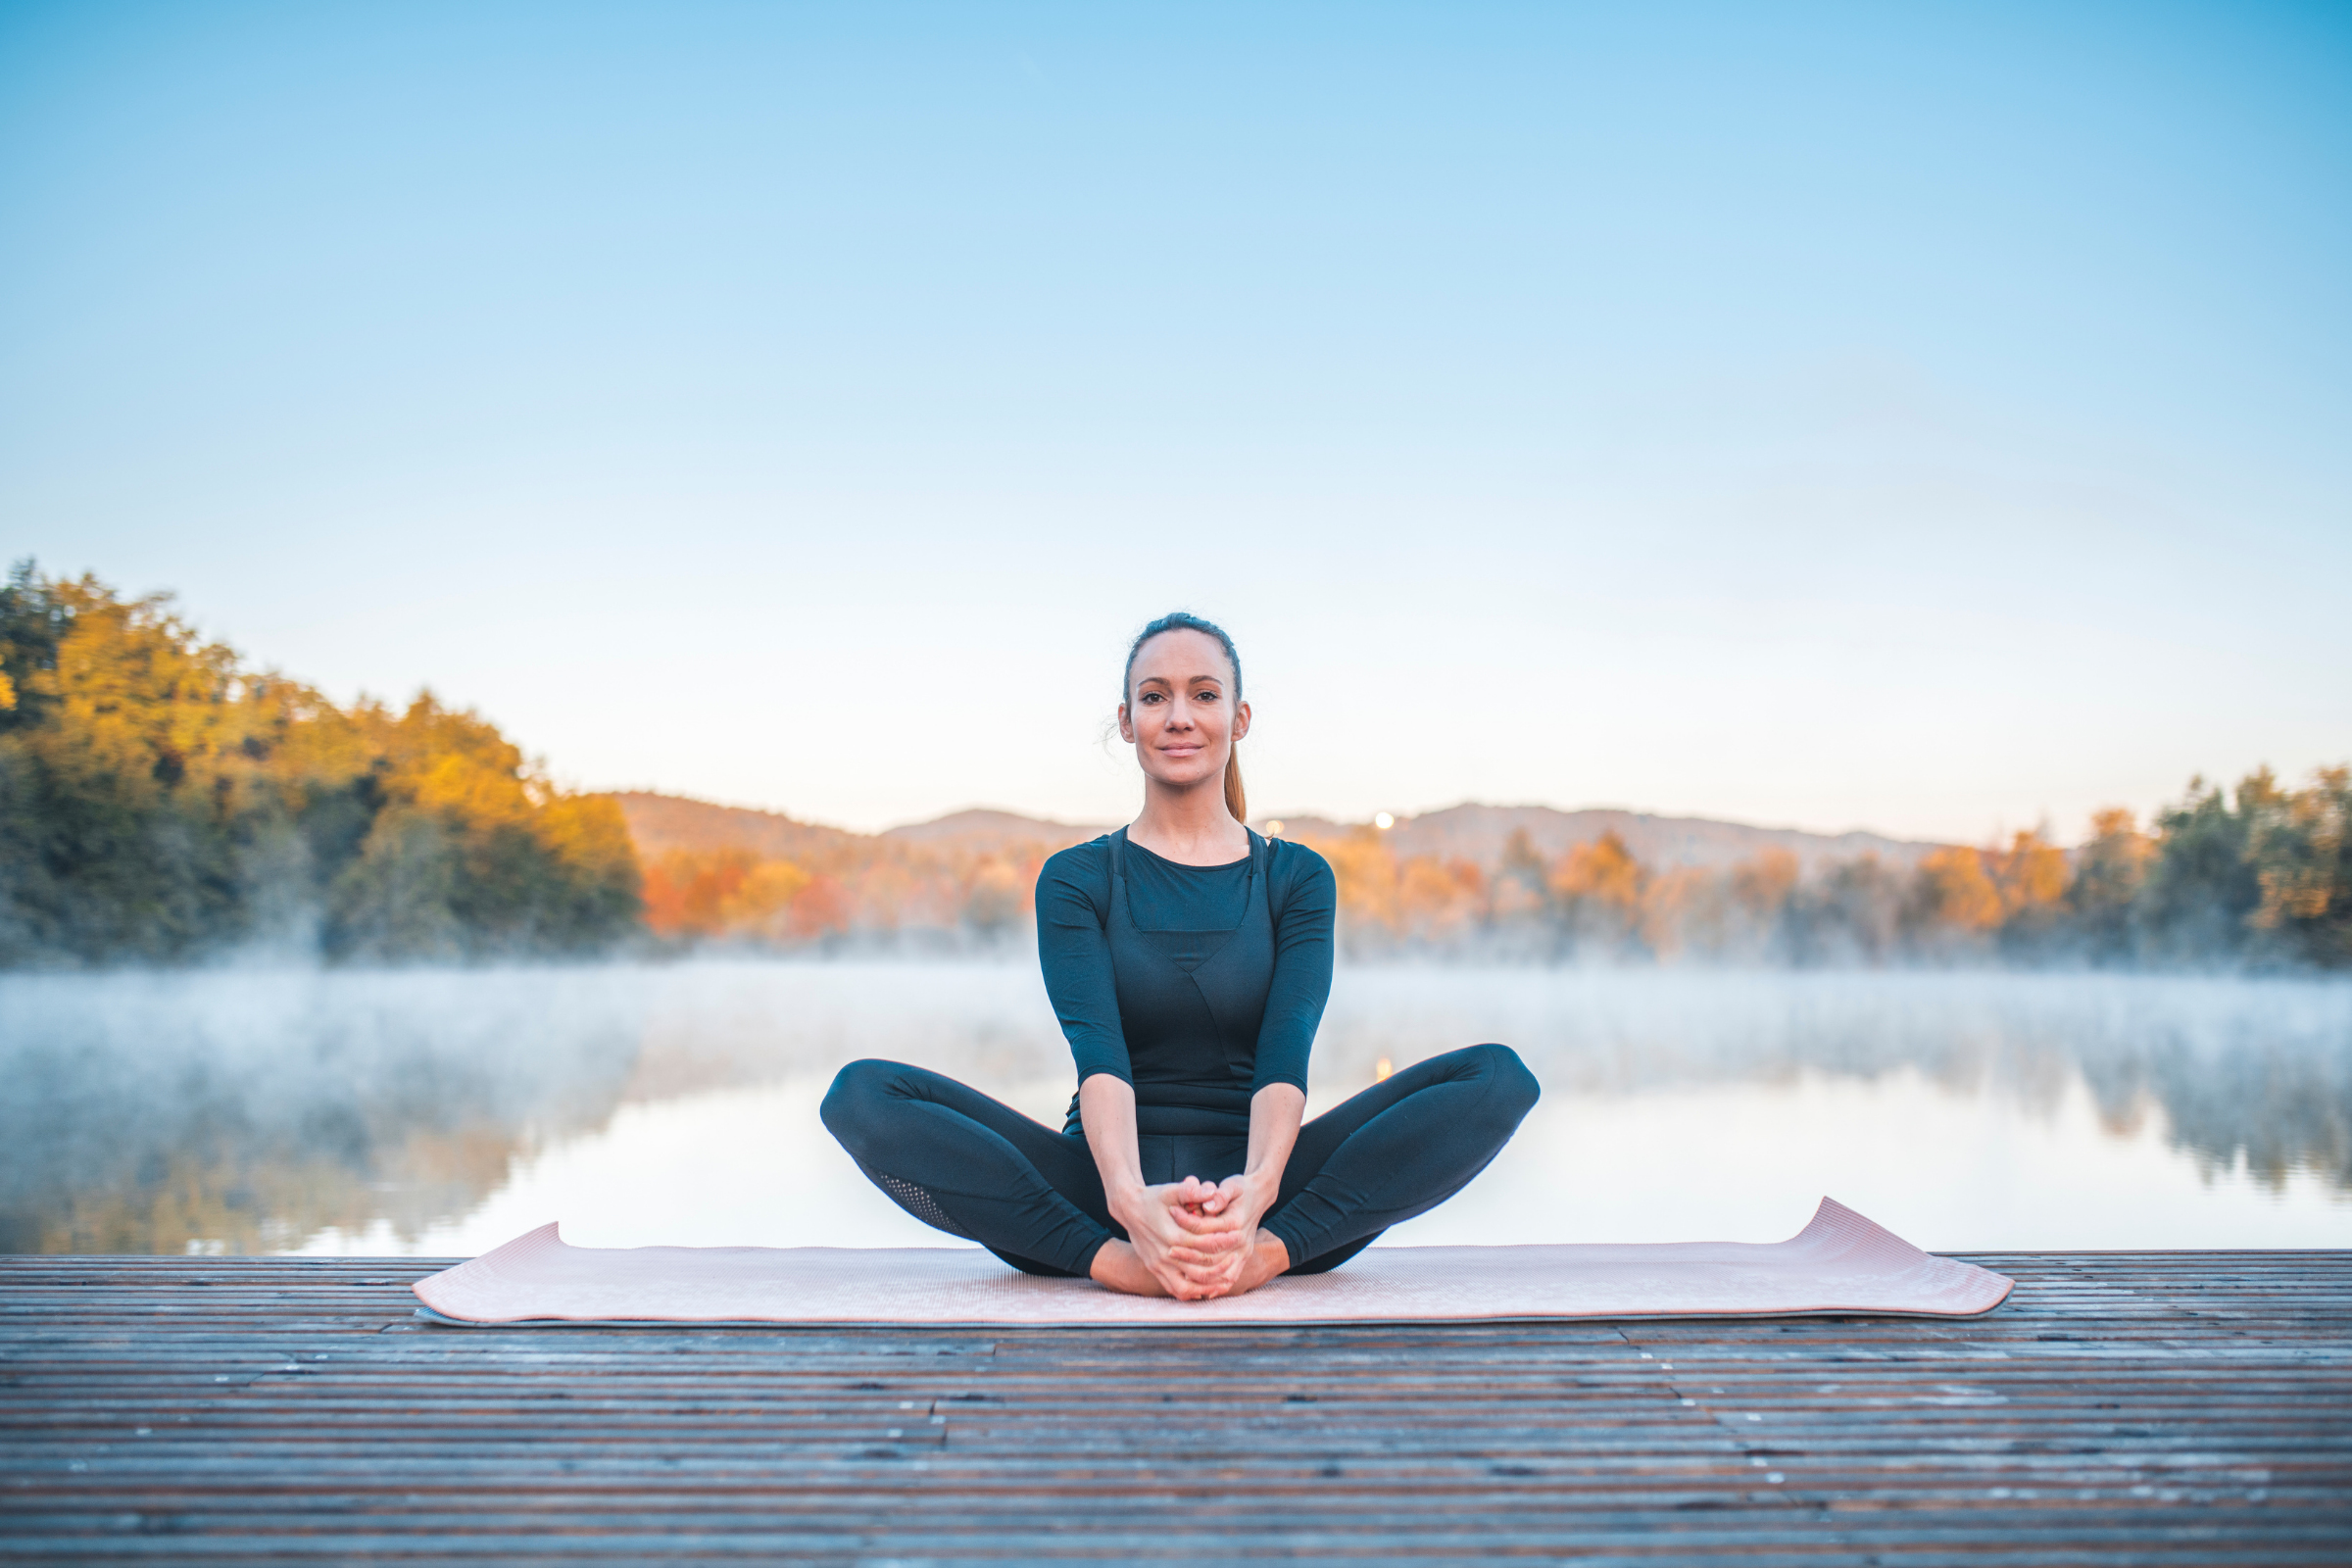 blonde woman with ponytail wearing all black on a wooden dock by water doing bound angle yoga pose